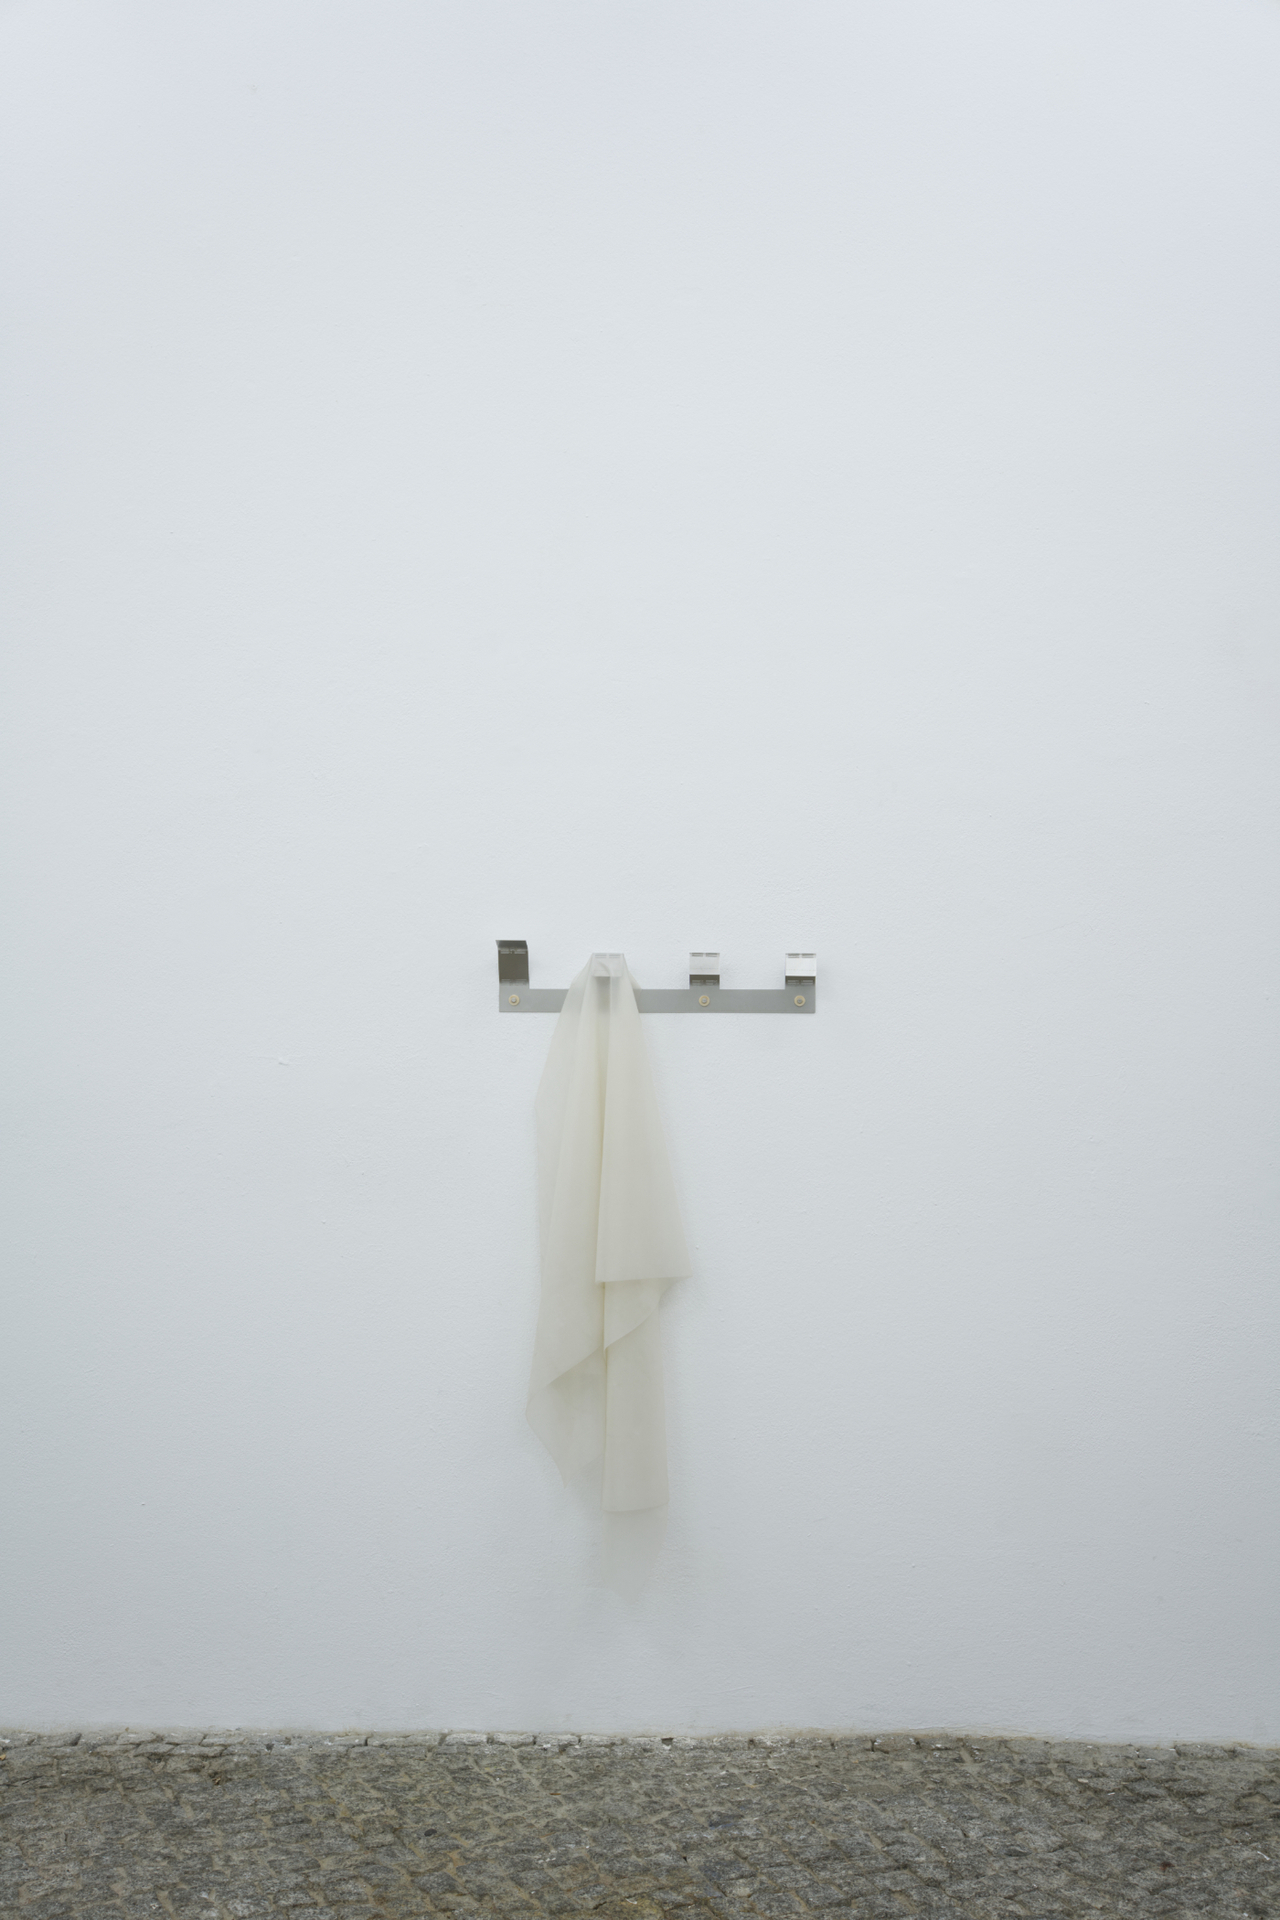 Marina Stanimirovic, COAT HANGER 3-7 YEAR, 2021, 103 x 48.5 x 6 cm, stainless steel, silicone rubber